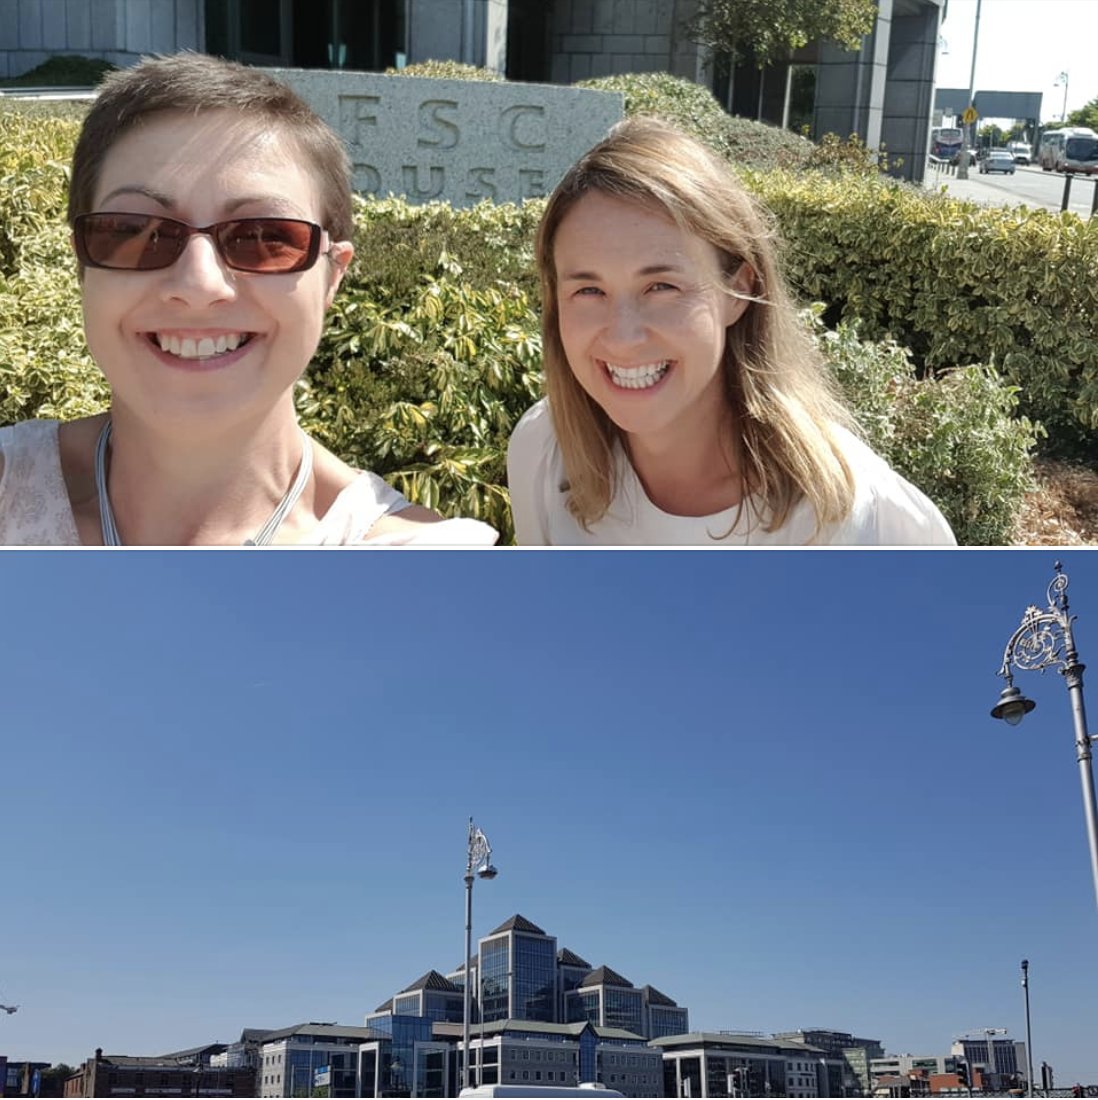 Not even the unprecedented heatwave stops @EQI_DCU researchers carrying out their work. @drbsweetman & Denise Frier spent the day interviewing stakeholders for the @NUIMerrionSq Uversity project.